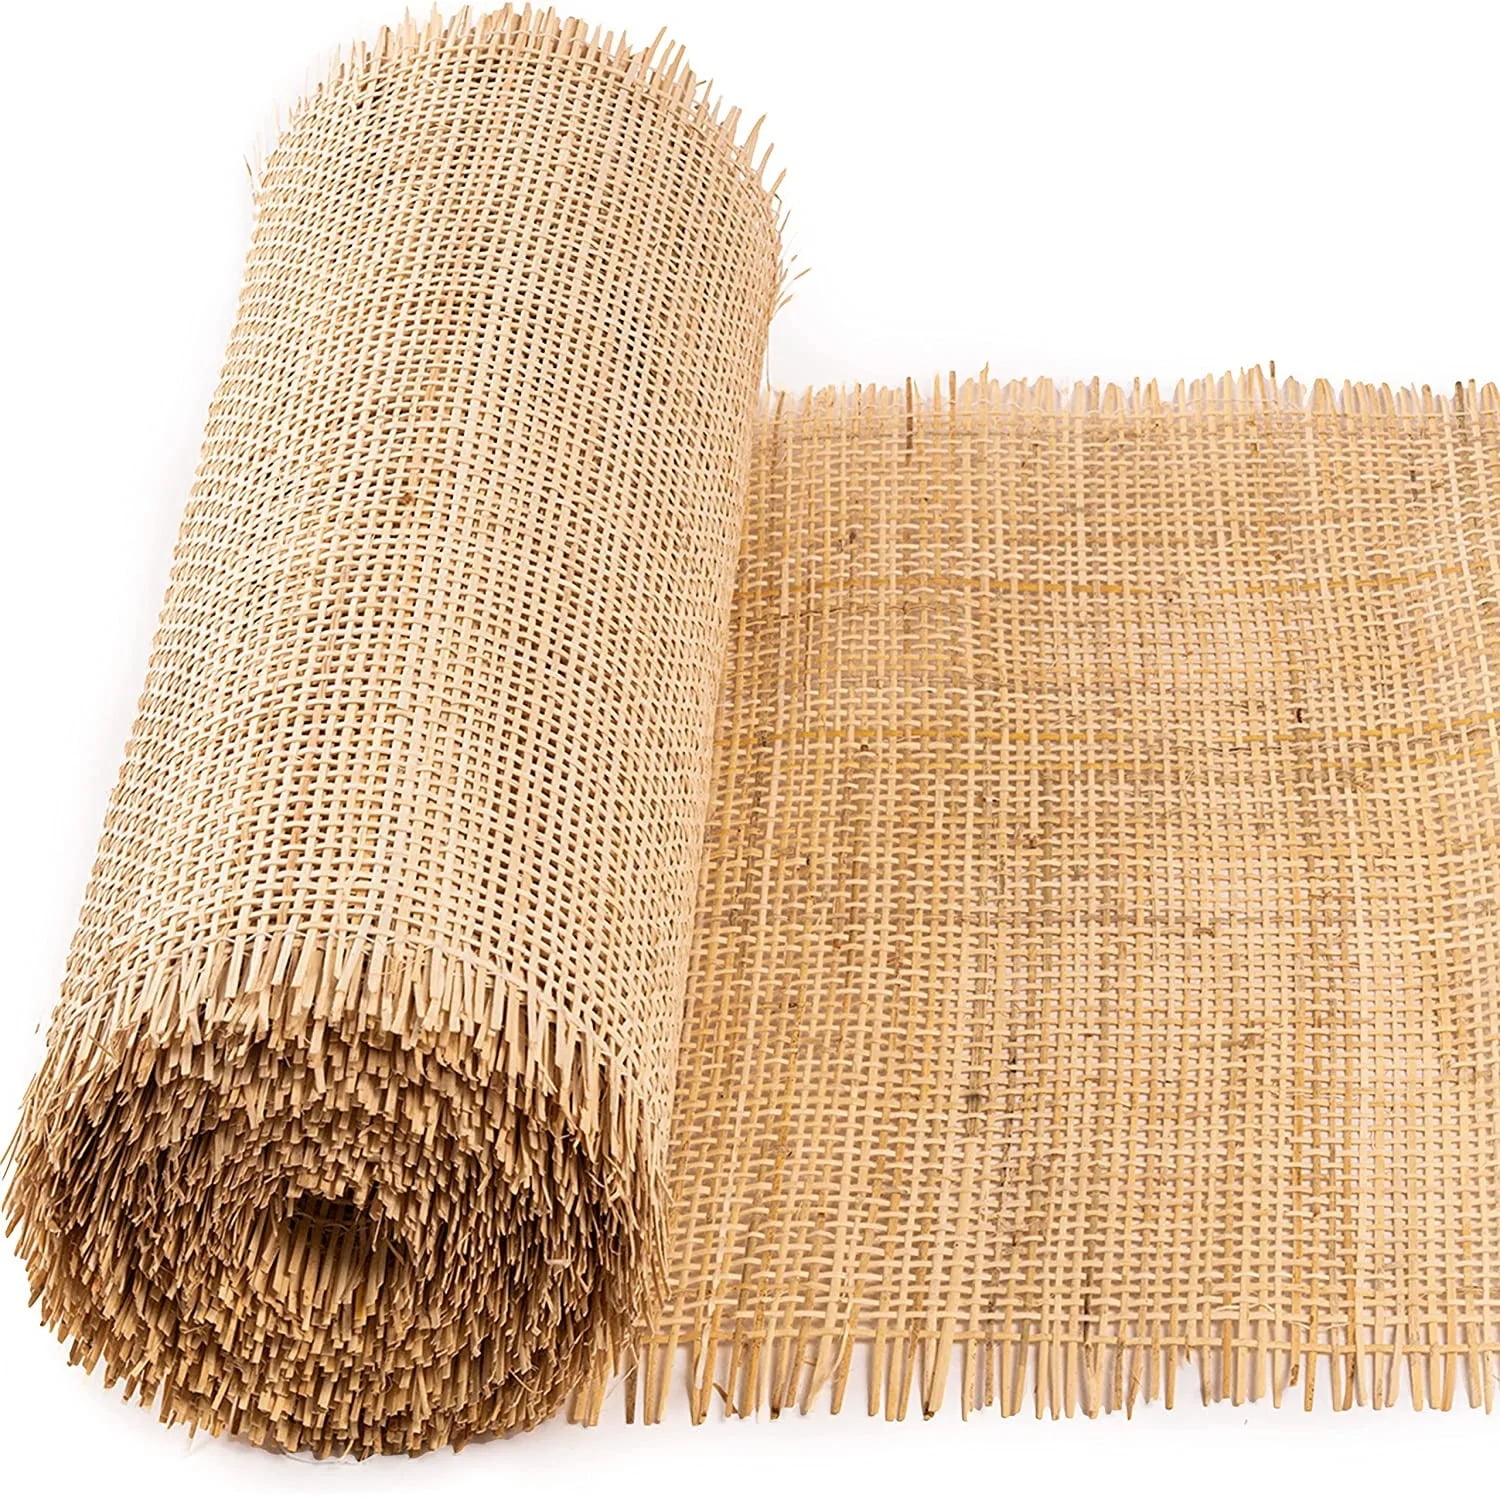 36 Wide Natural Brown Rattan Square Cane Webbing Radio Mesh Caning  Material for Chairs, Cabinet, Door -Open Weave Wicker Woven Rattan Sheets  (36 x 48) 